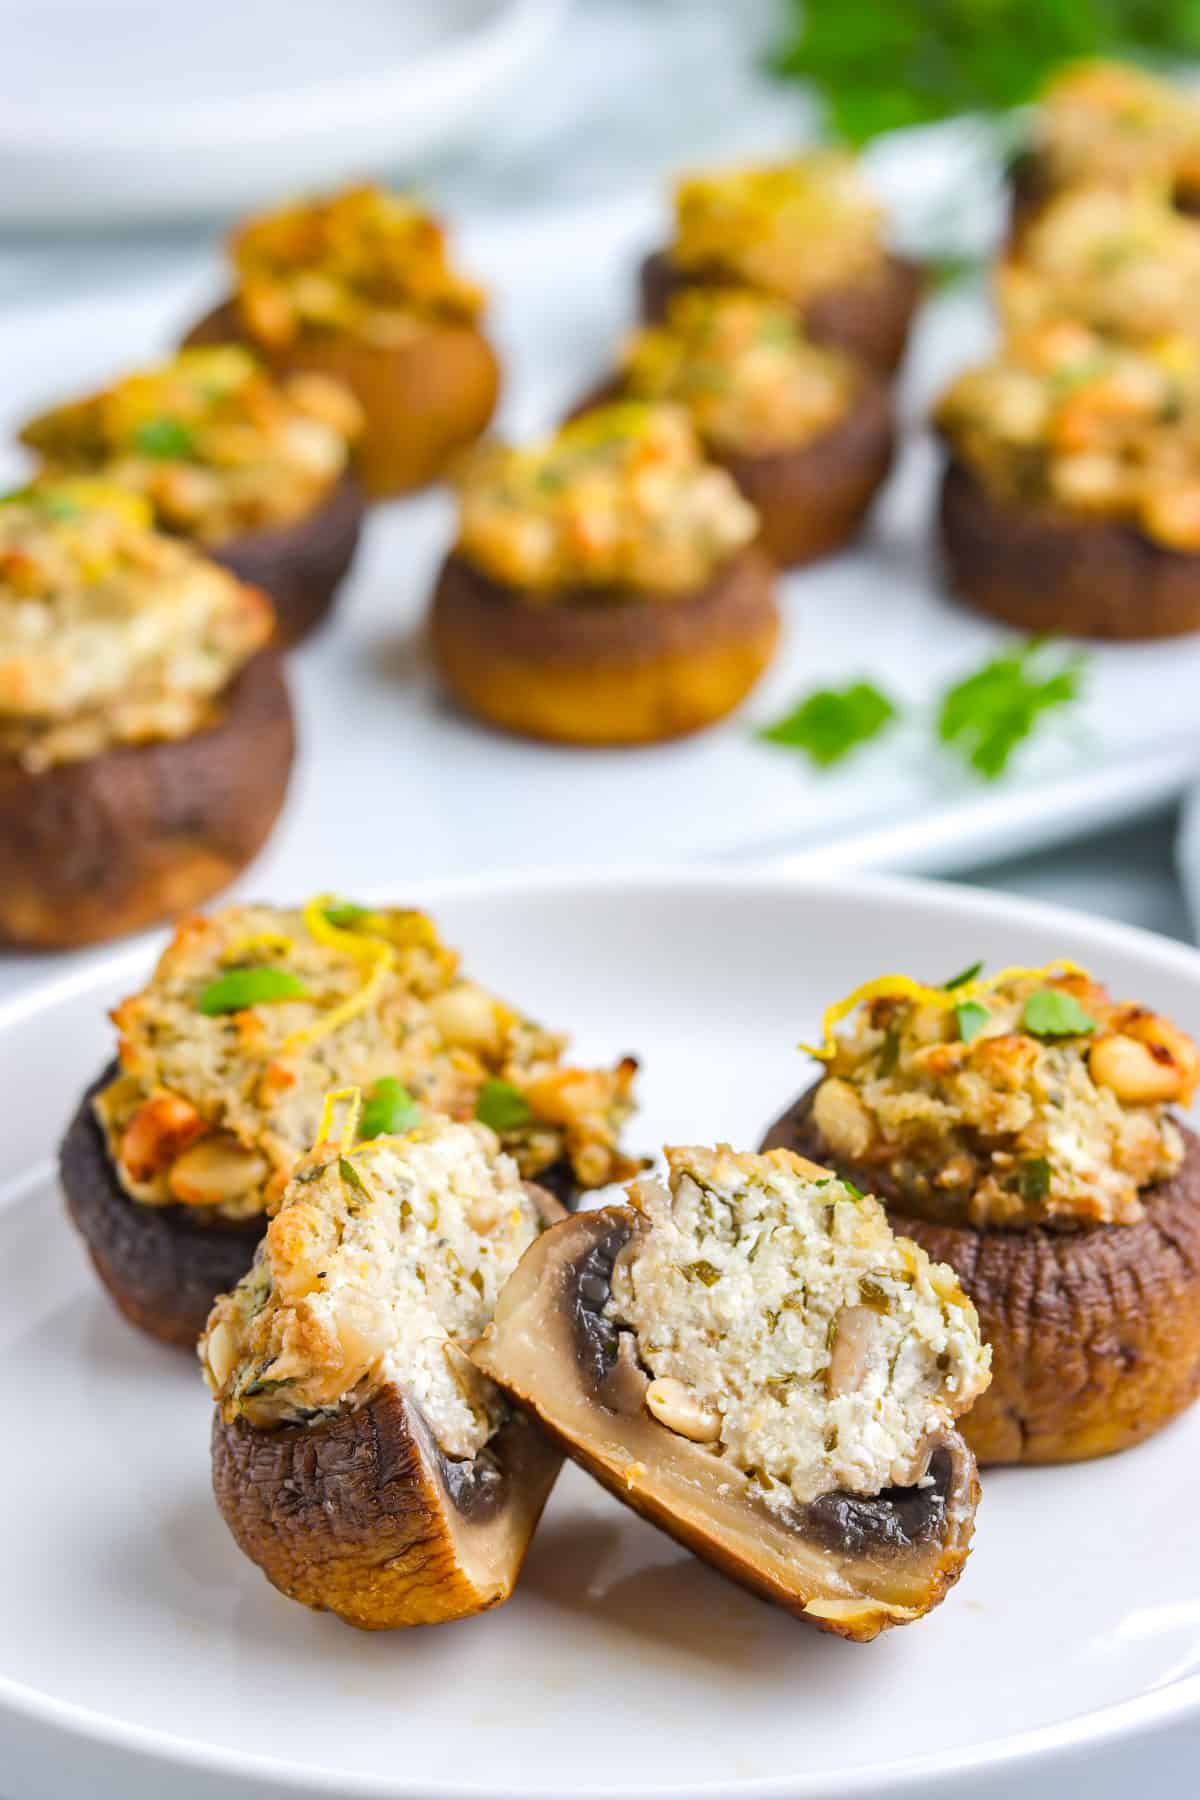 A Stuffed Mushroom With Goach Cheese cut in half so you can see the interior of the mushrooms.